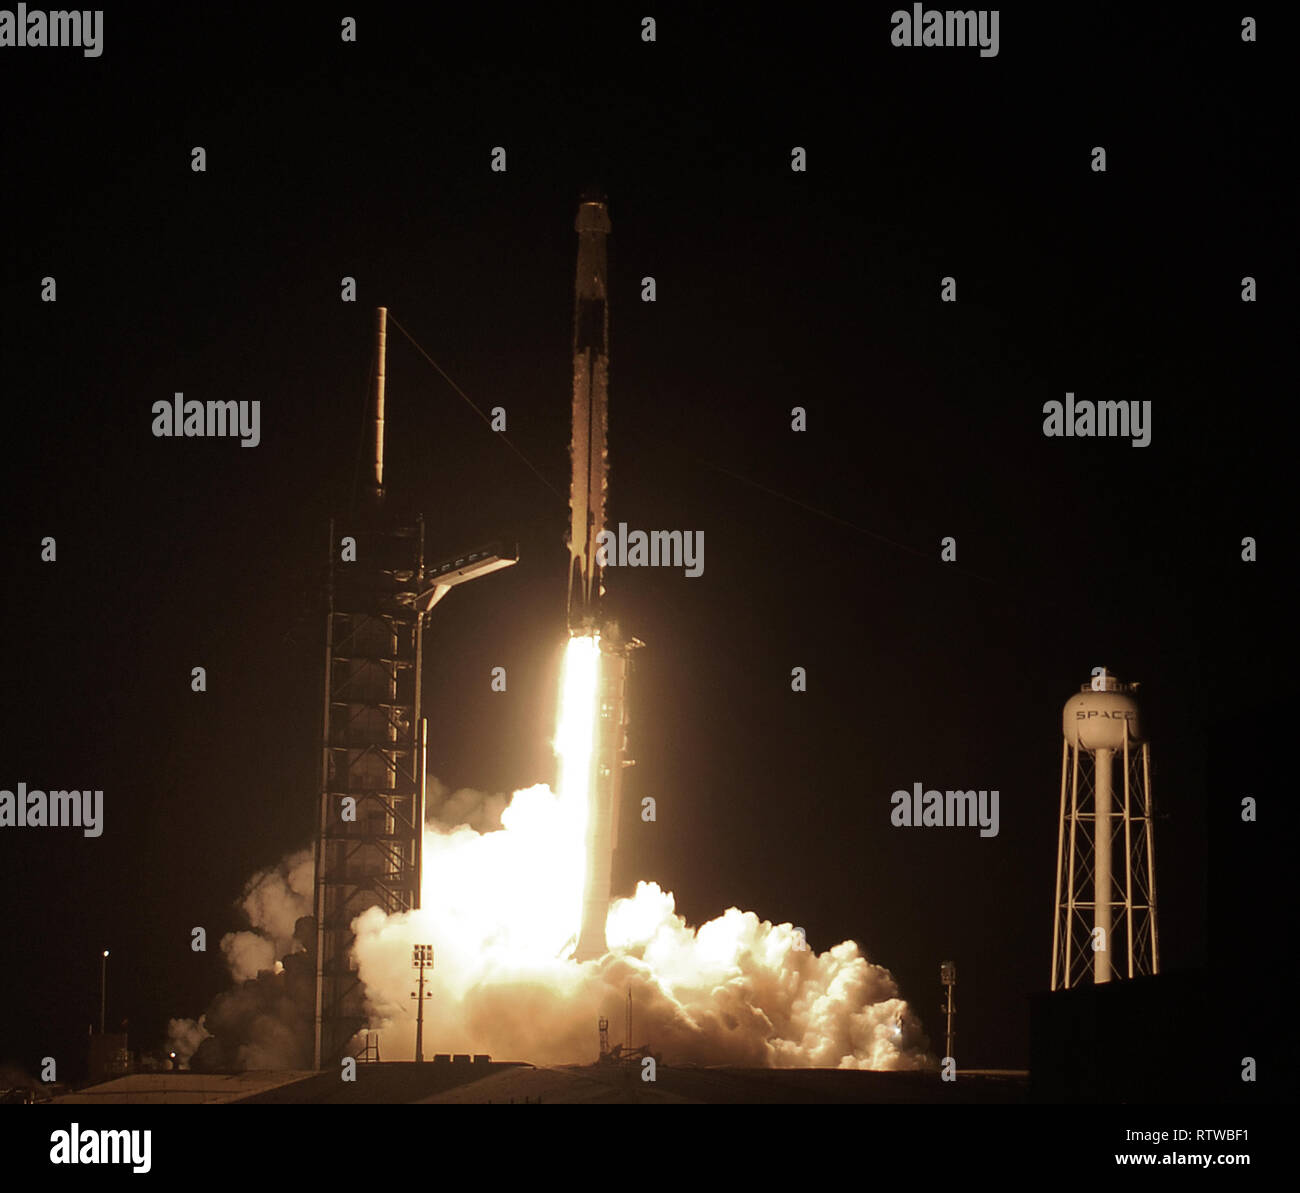 March 2, 2019 - Kennedy Space Center, Florida, United States - A SpaceX Falcon 9 rocket carrying the unmanned Crew Dragon capsule launches successfully on its first flight, Demo-1, on March 2 at 2:49 a.m.EST from Pad 39A at the Kennedy Space Center in Florida. (Paul Hennessy/Alamy) Stock Photo